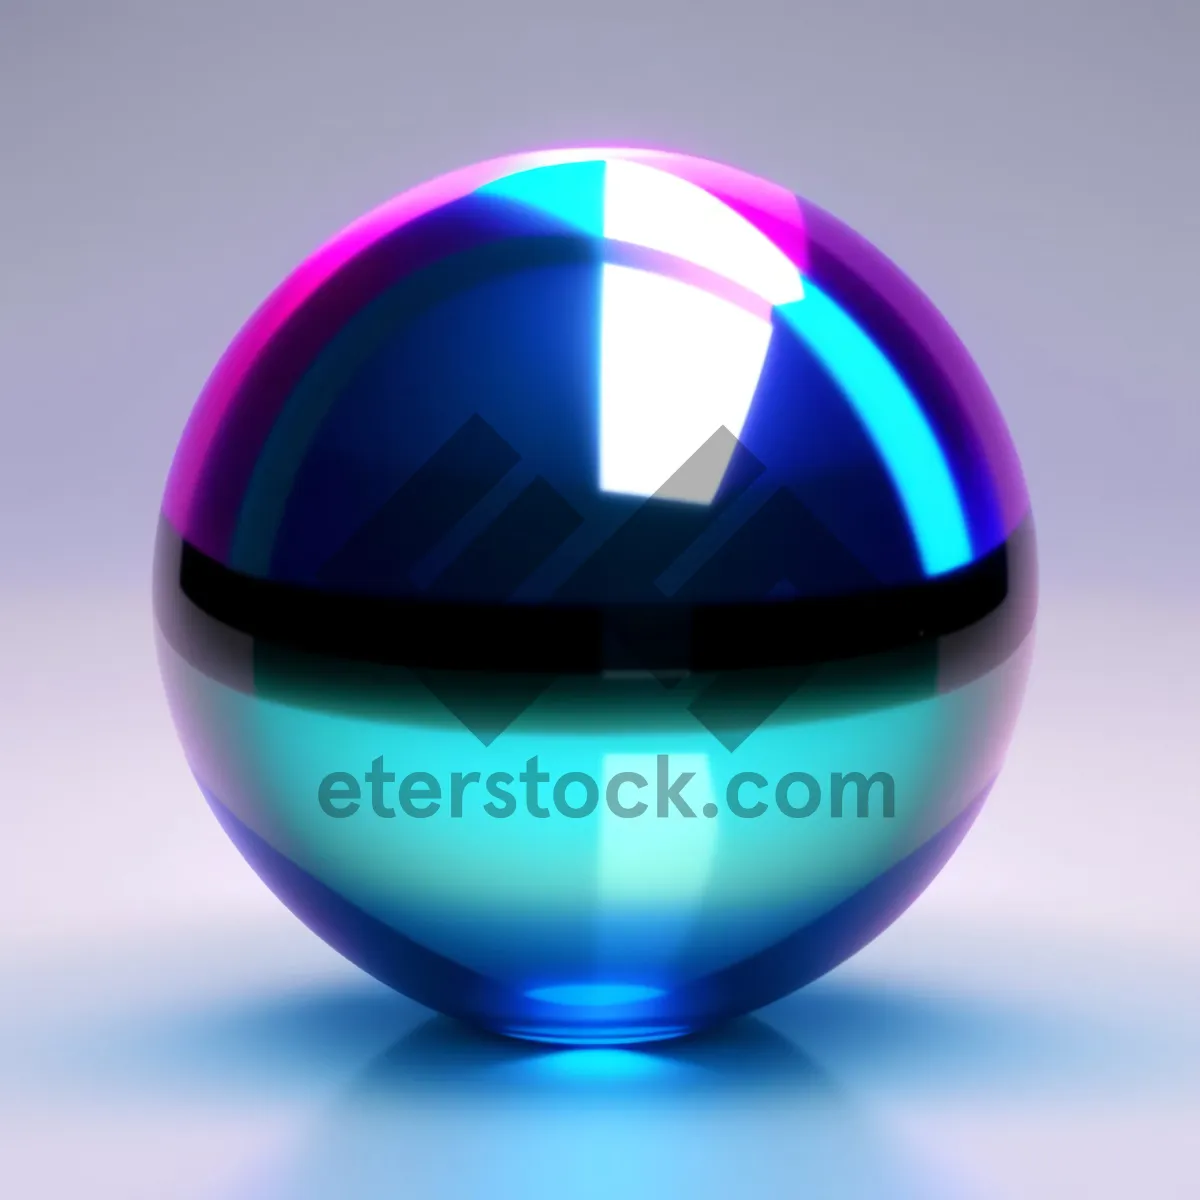 Picture of Glossy Shiny Glass Sphere Icon Button